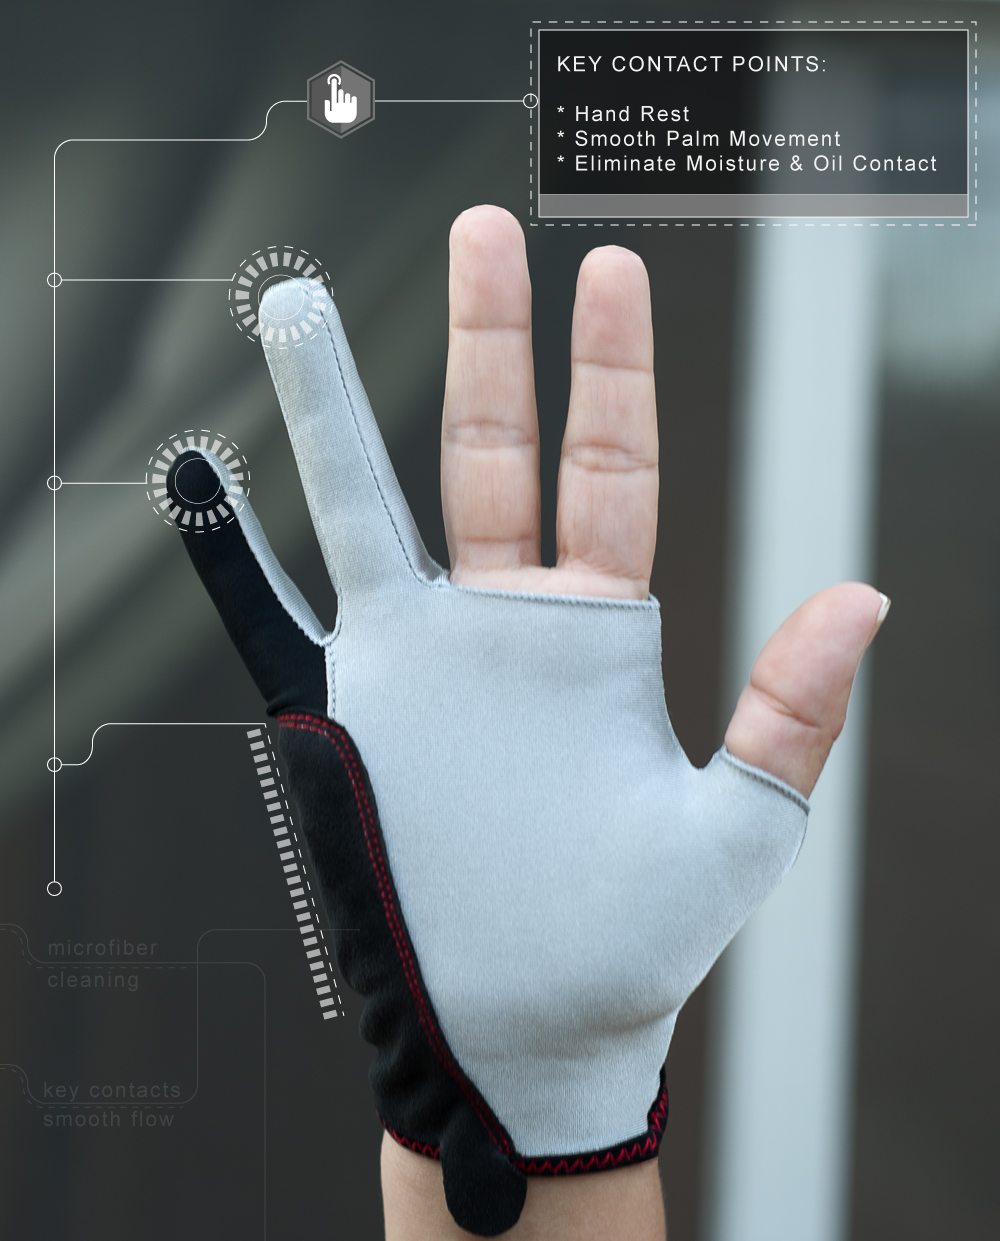 HOW TO MAKE YOUR OWN TABLET GLOVE - FOR DIGITAL ARTISTS 